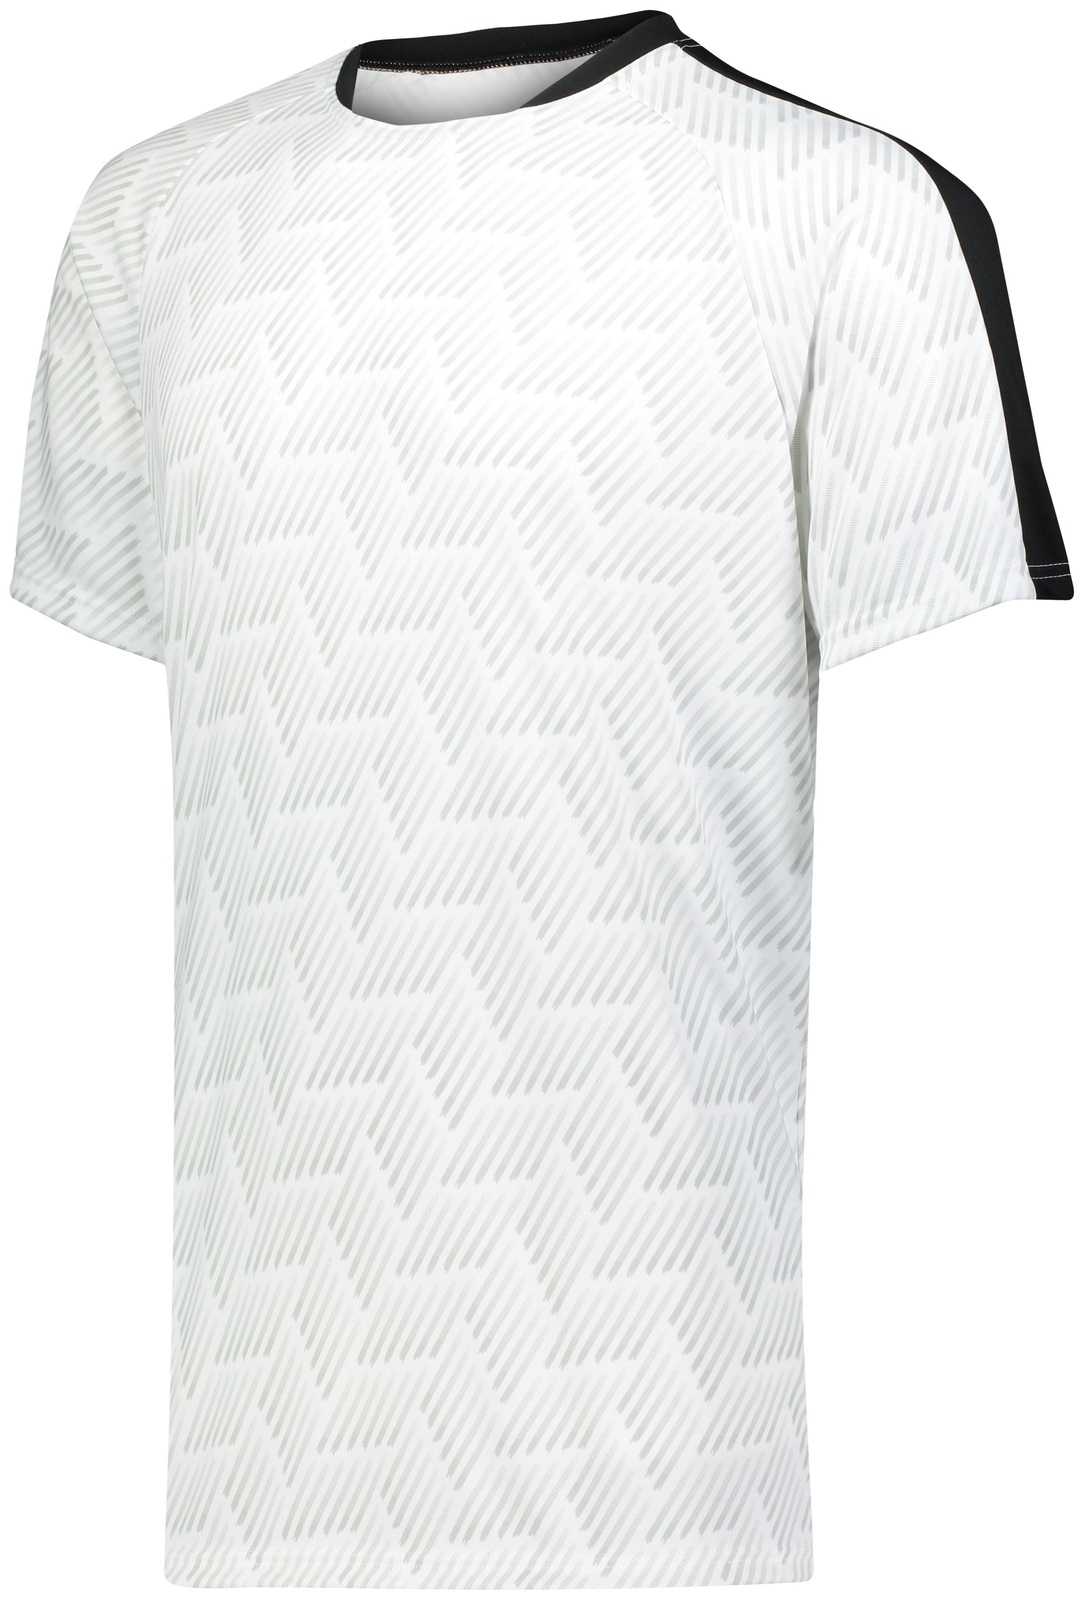 High Five 322981 Youth Hypervolt Jersey - White Print Black - HIT a Double